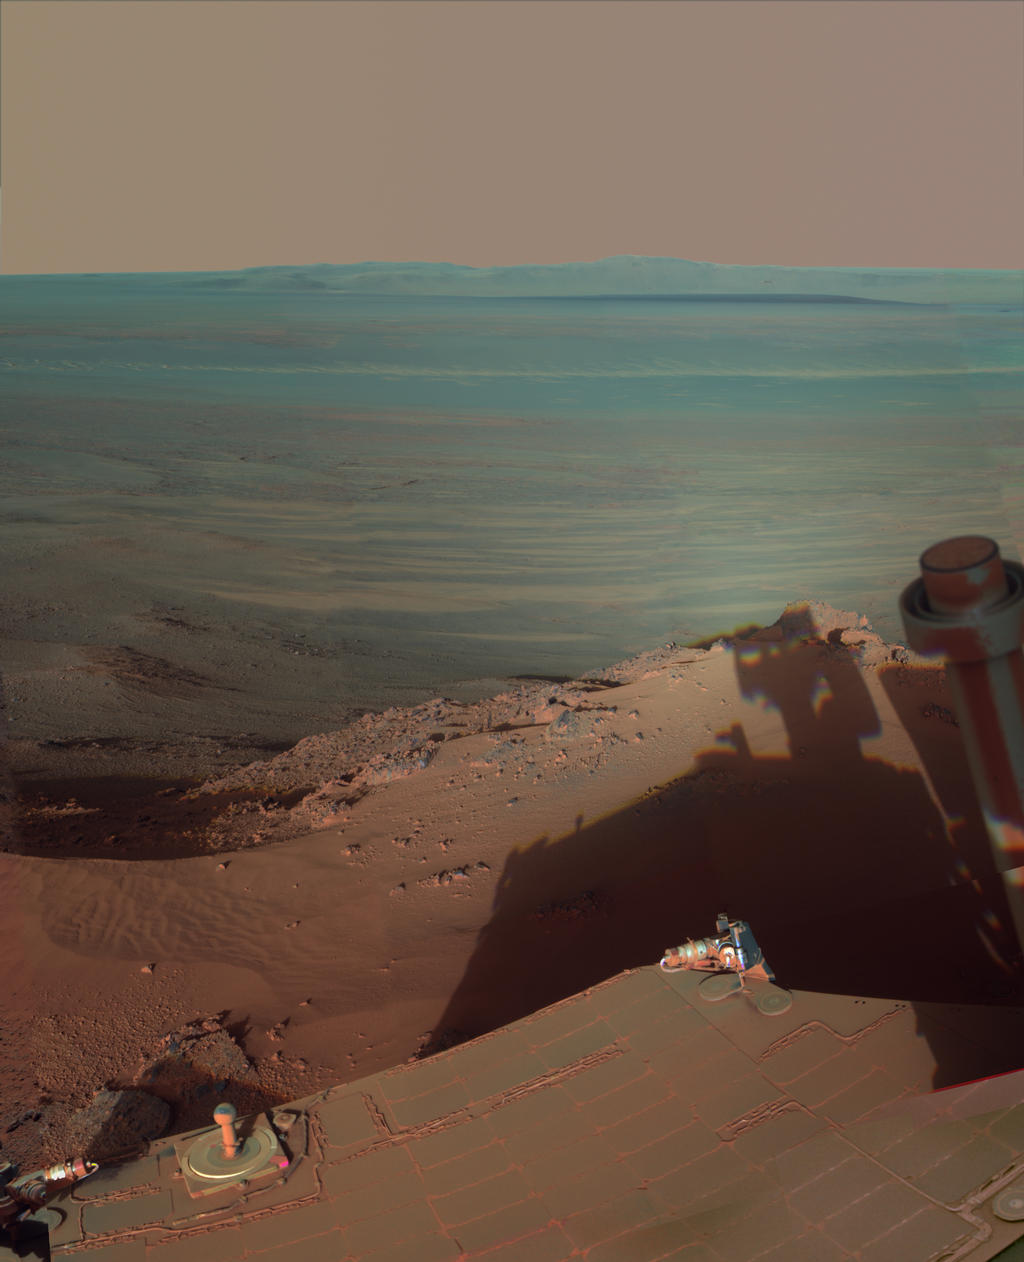 The Best Pictures Of Mars